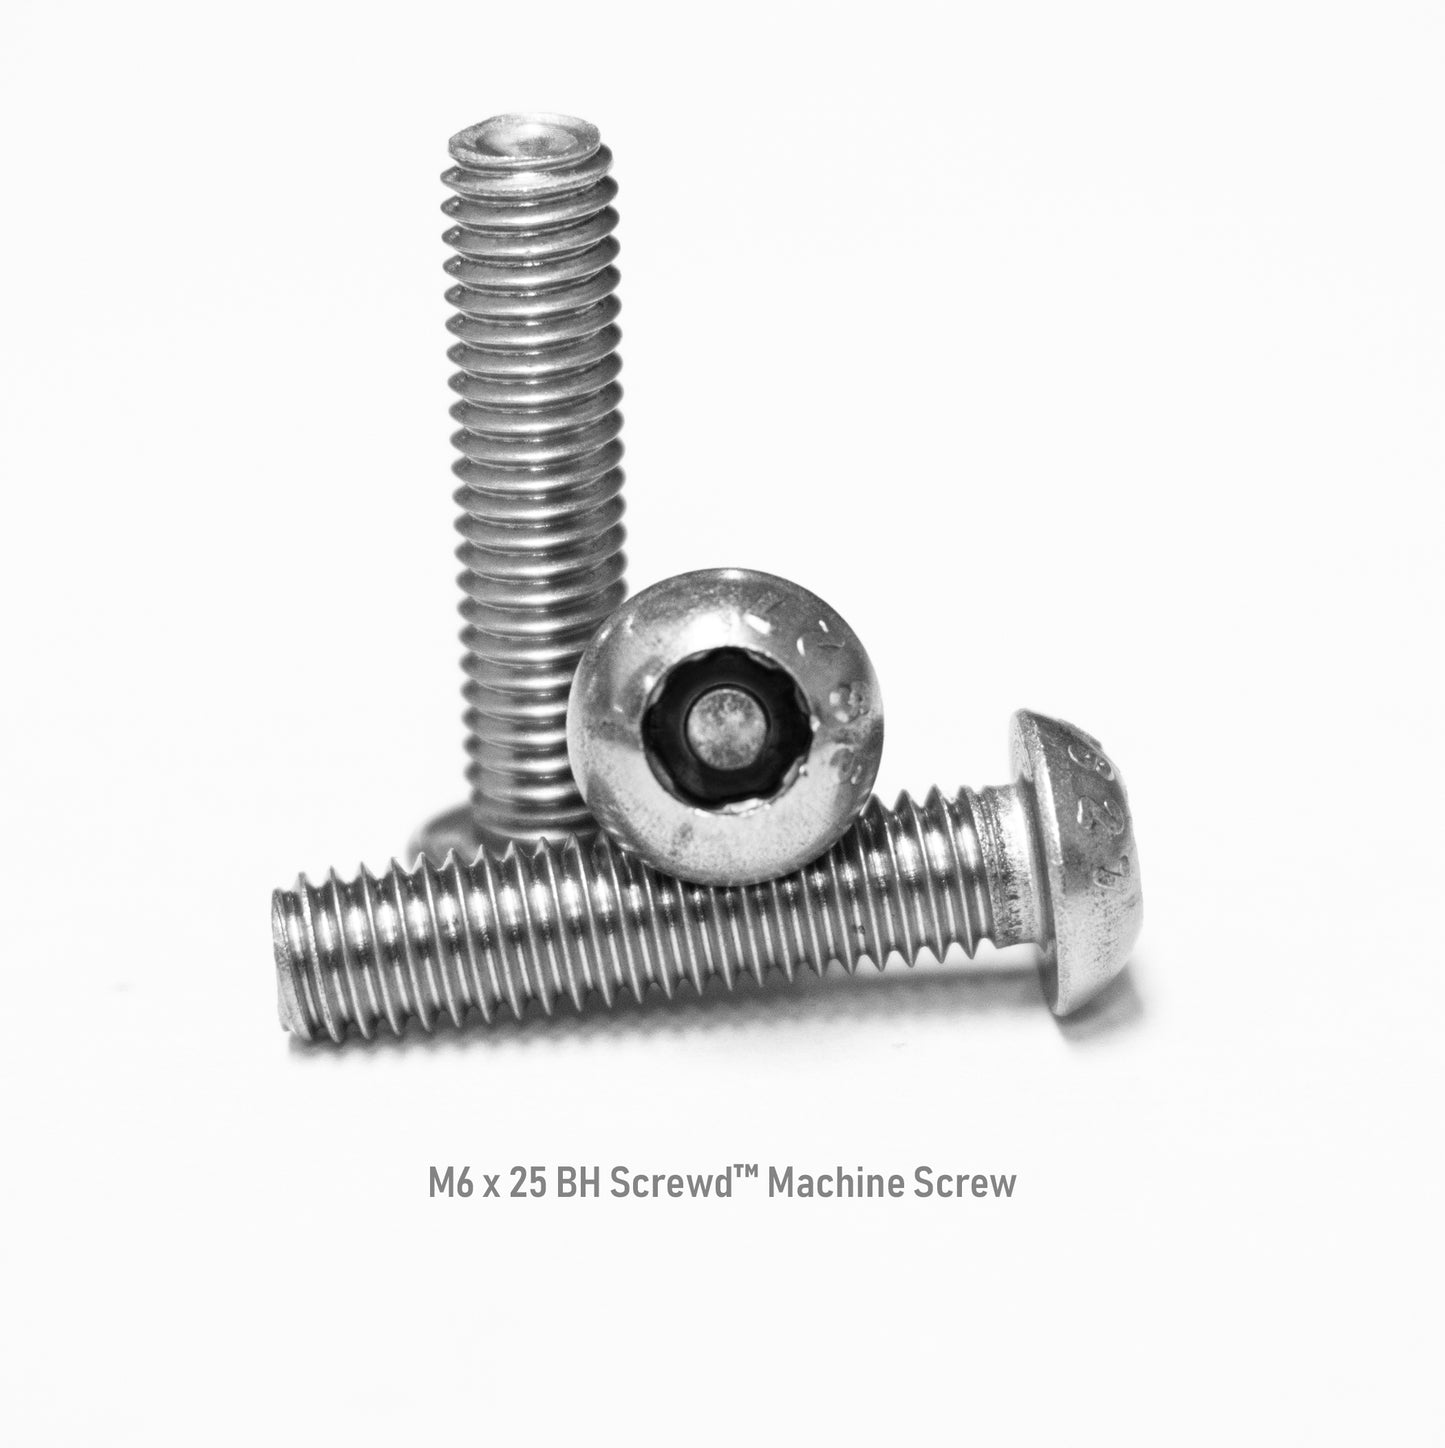 M6 x 25 Button Head Screwd® Security Metric Machine Screw Made out of Stainless Steel